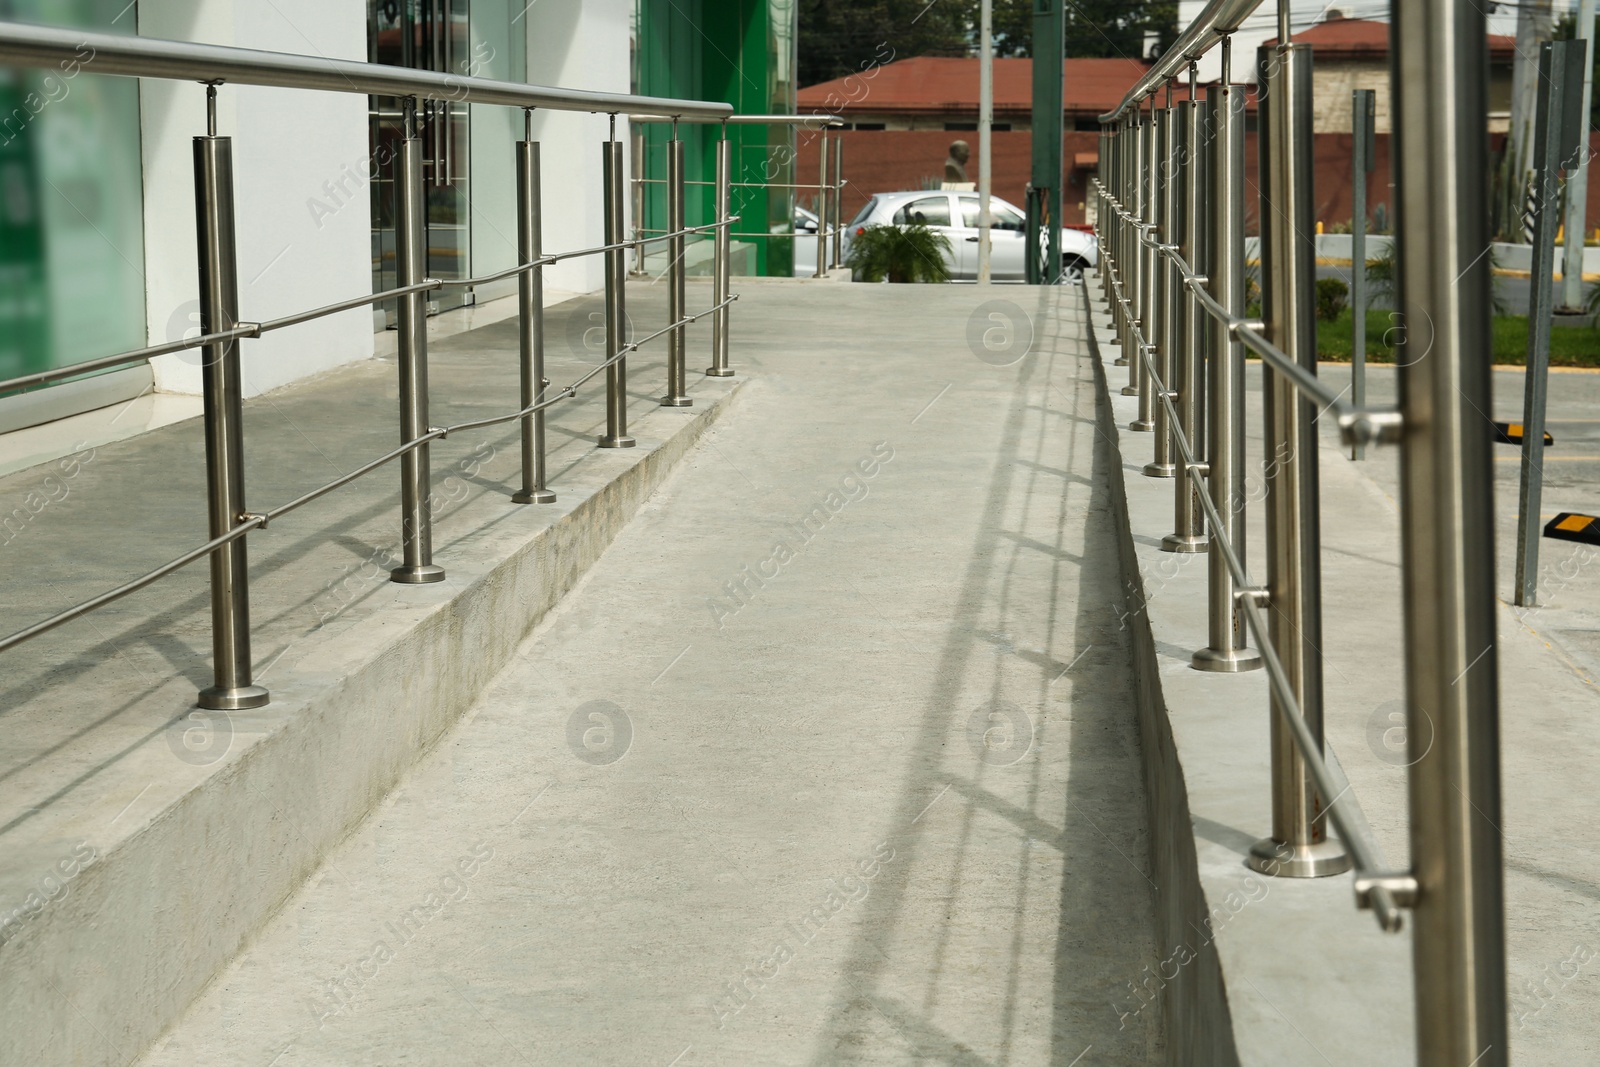 Photo of Concrete ramp with shiny metal railings outdoors